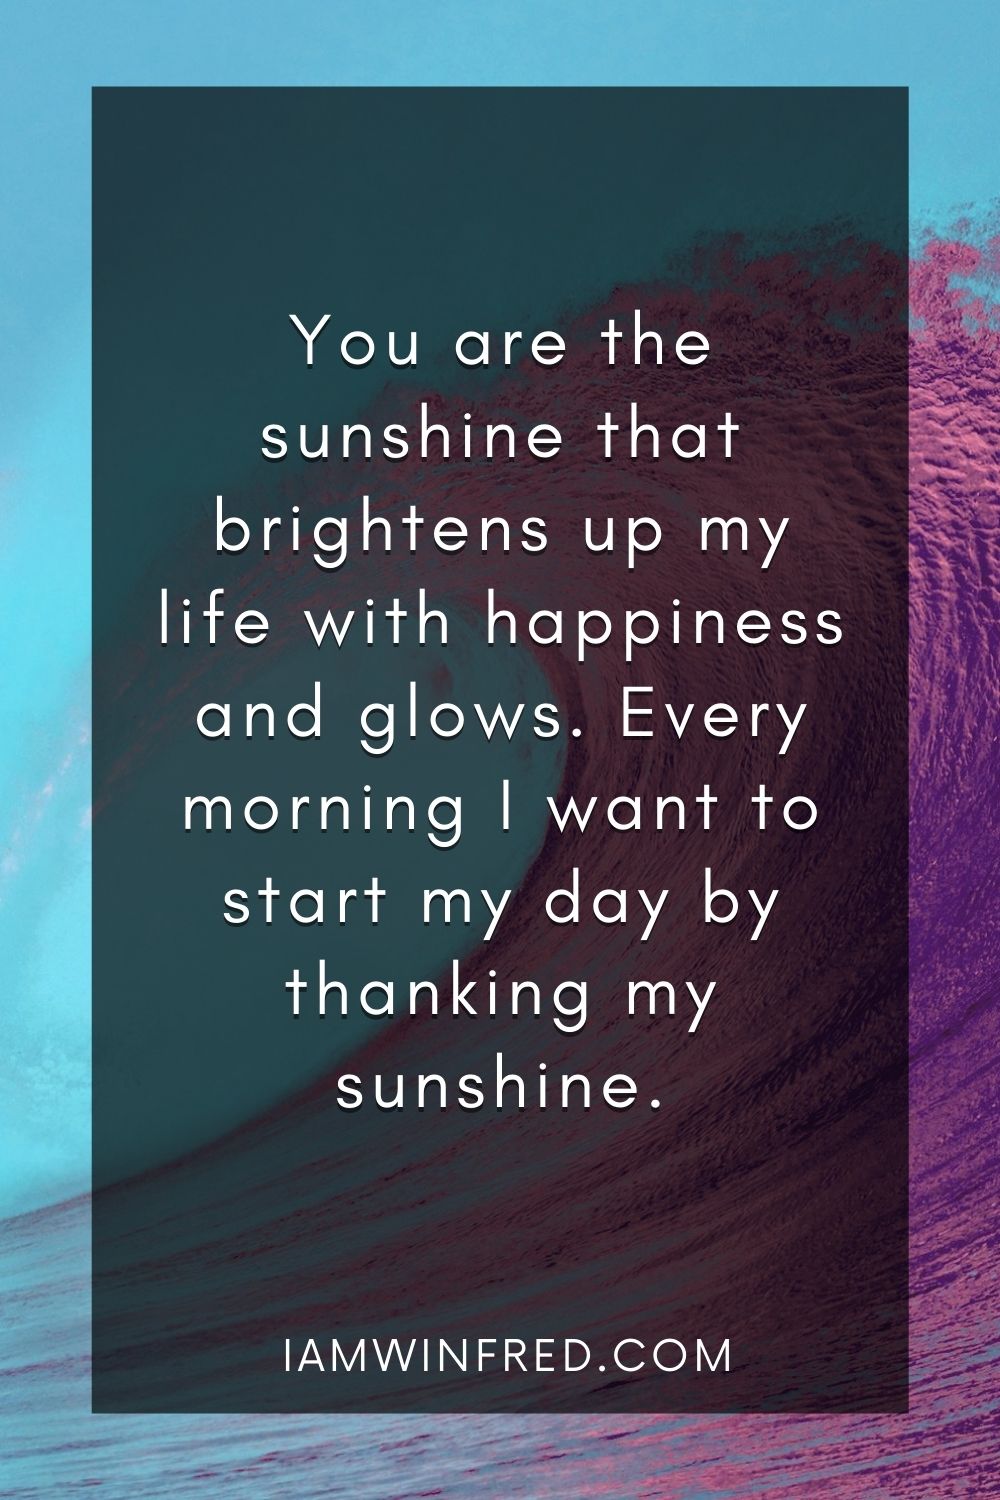 You Are The Sunshine That Brightens Up My Life With Happiness And Glows. Every Morning I Want To Start My Day By Thanking My Sunshine.